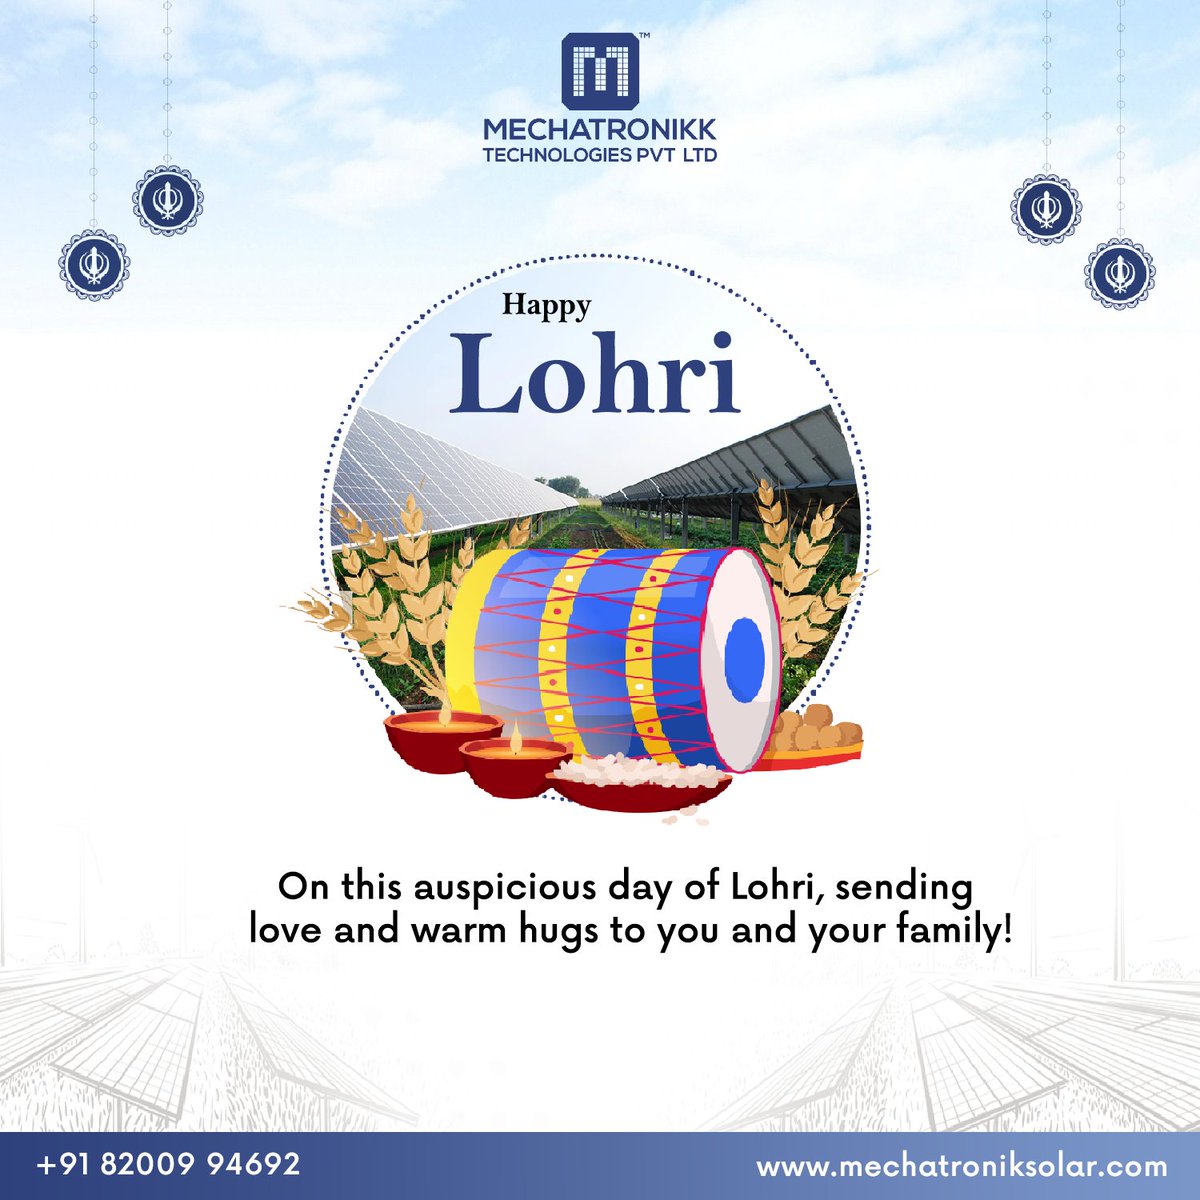 On this auspicious day of Lohri, sending love and warm hugs to you and your family!
Happy Lohri!
.
.
#HappyLohri #HappyLohri2024 #Lohri #Lohrifestival #BestSolarCompany #SolarPanels #mechatroniksolar #Ahmedabad #Gujarat